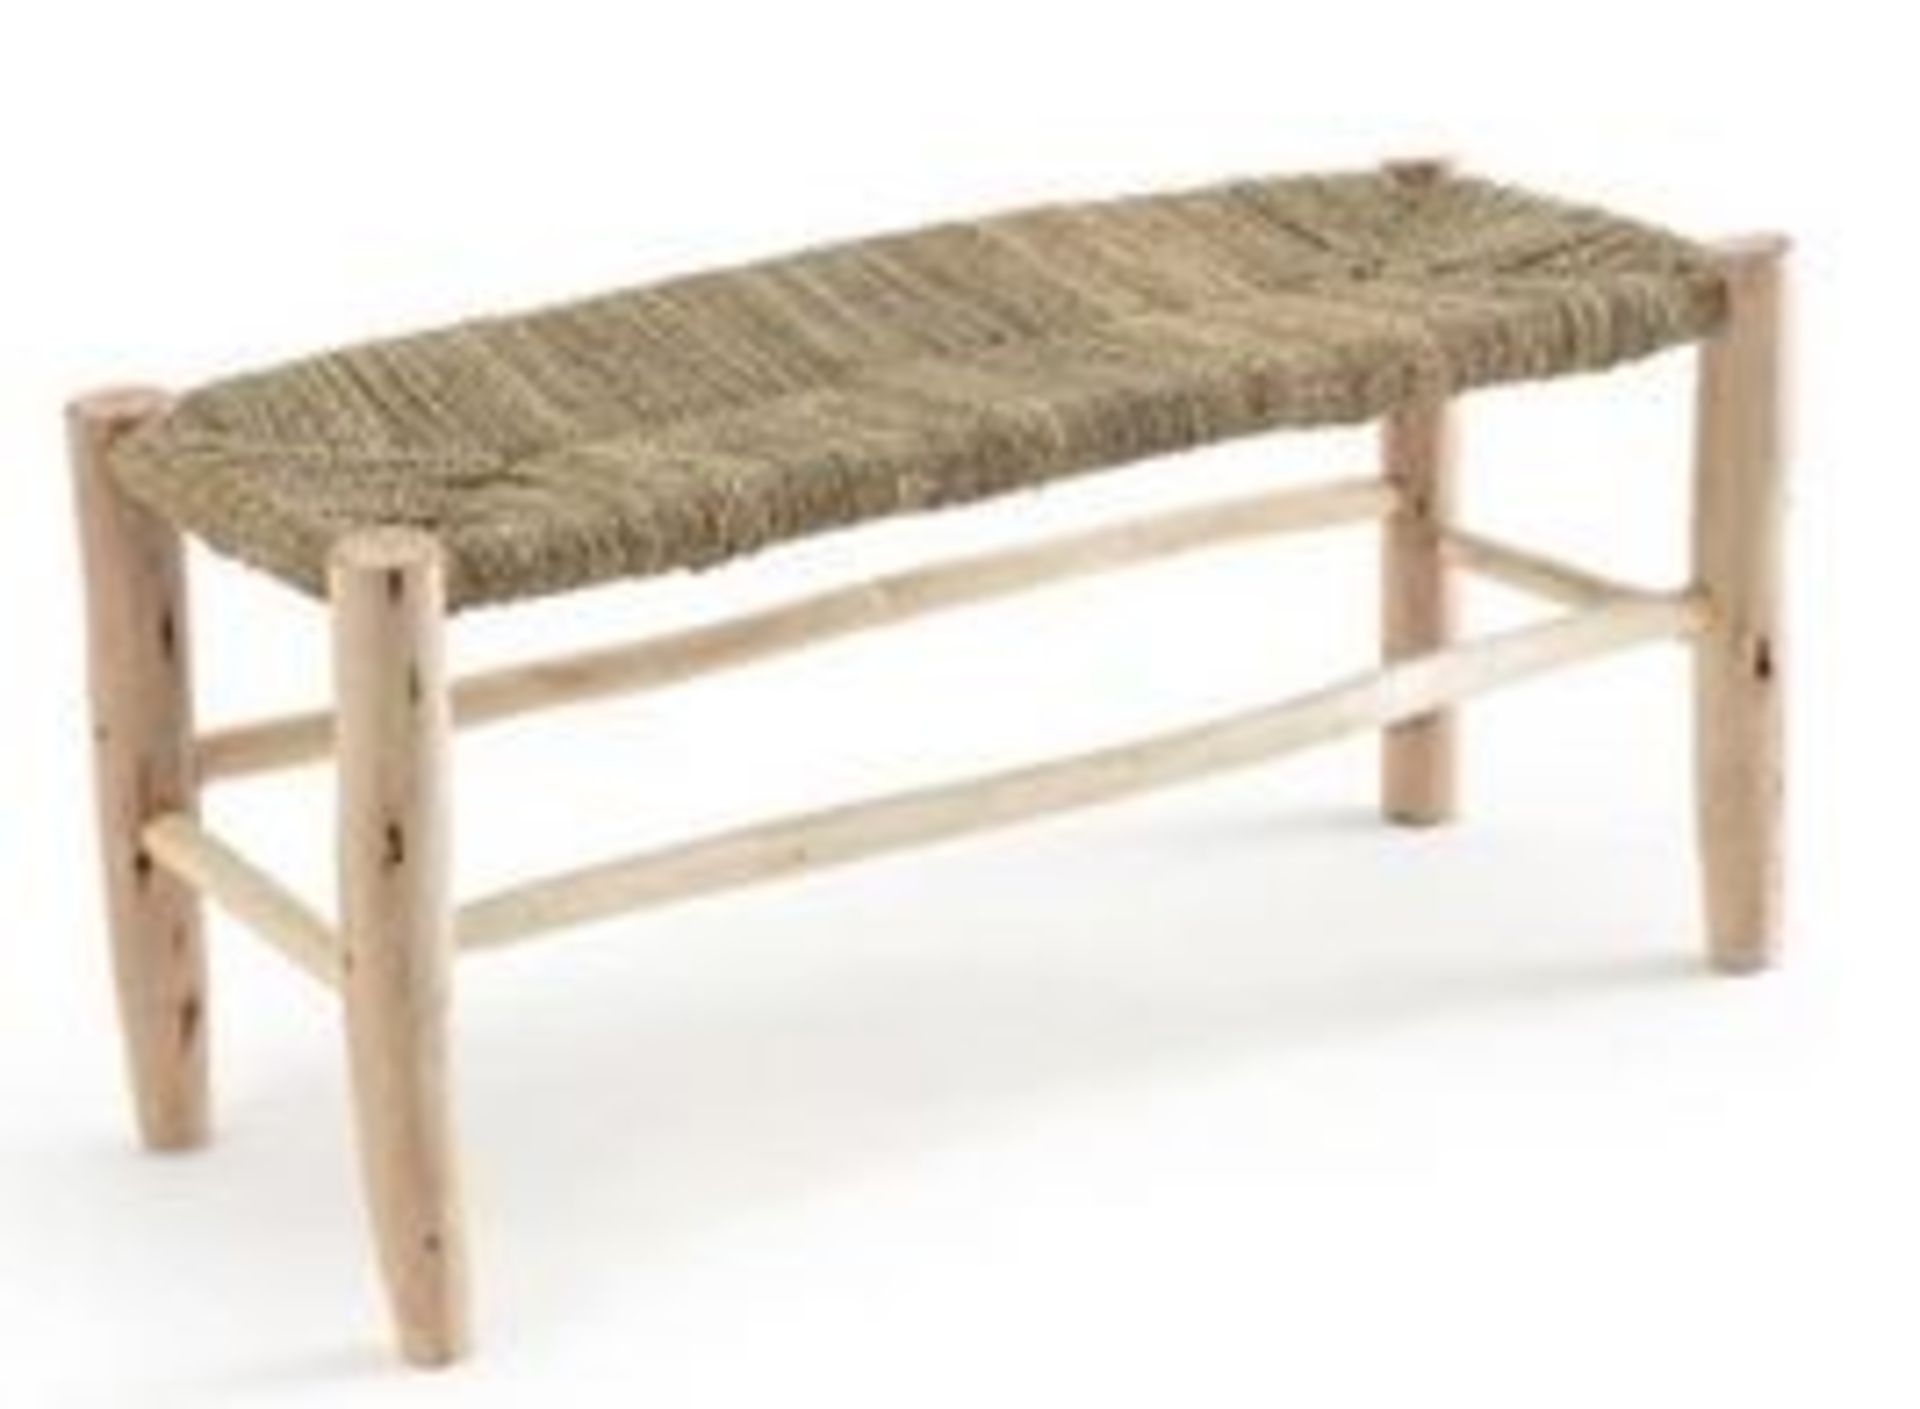 1 GRADE A GHADA RAW WILLOW WOOD BENCH IN NATURAL / RRP £145.00 (PUBLIC VIEWING AVAILABLE)